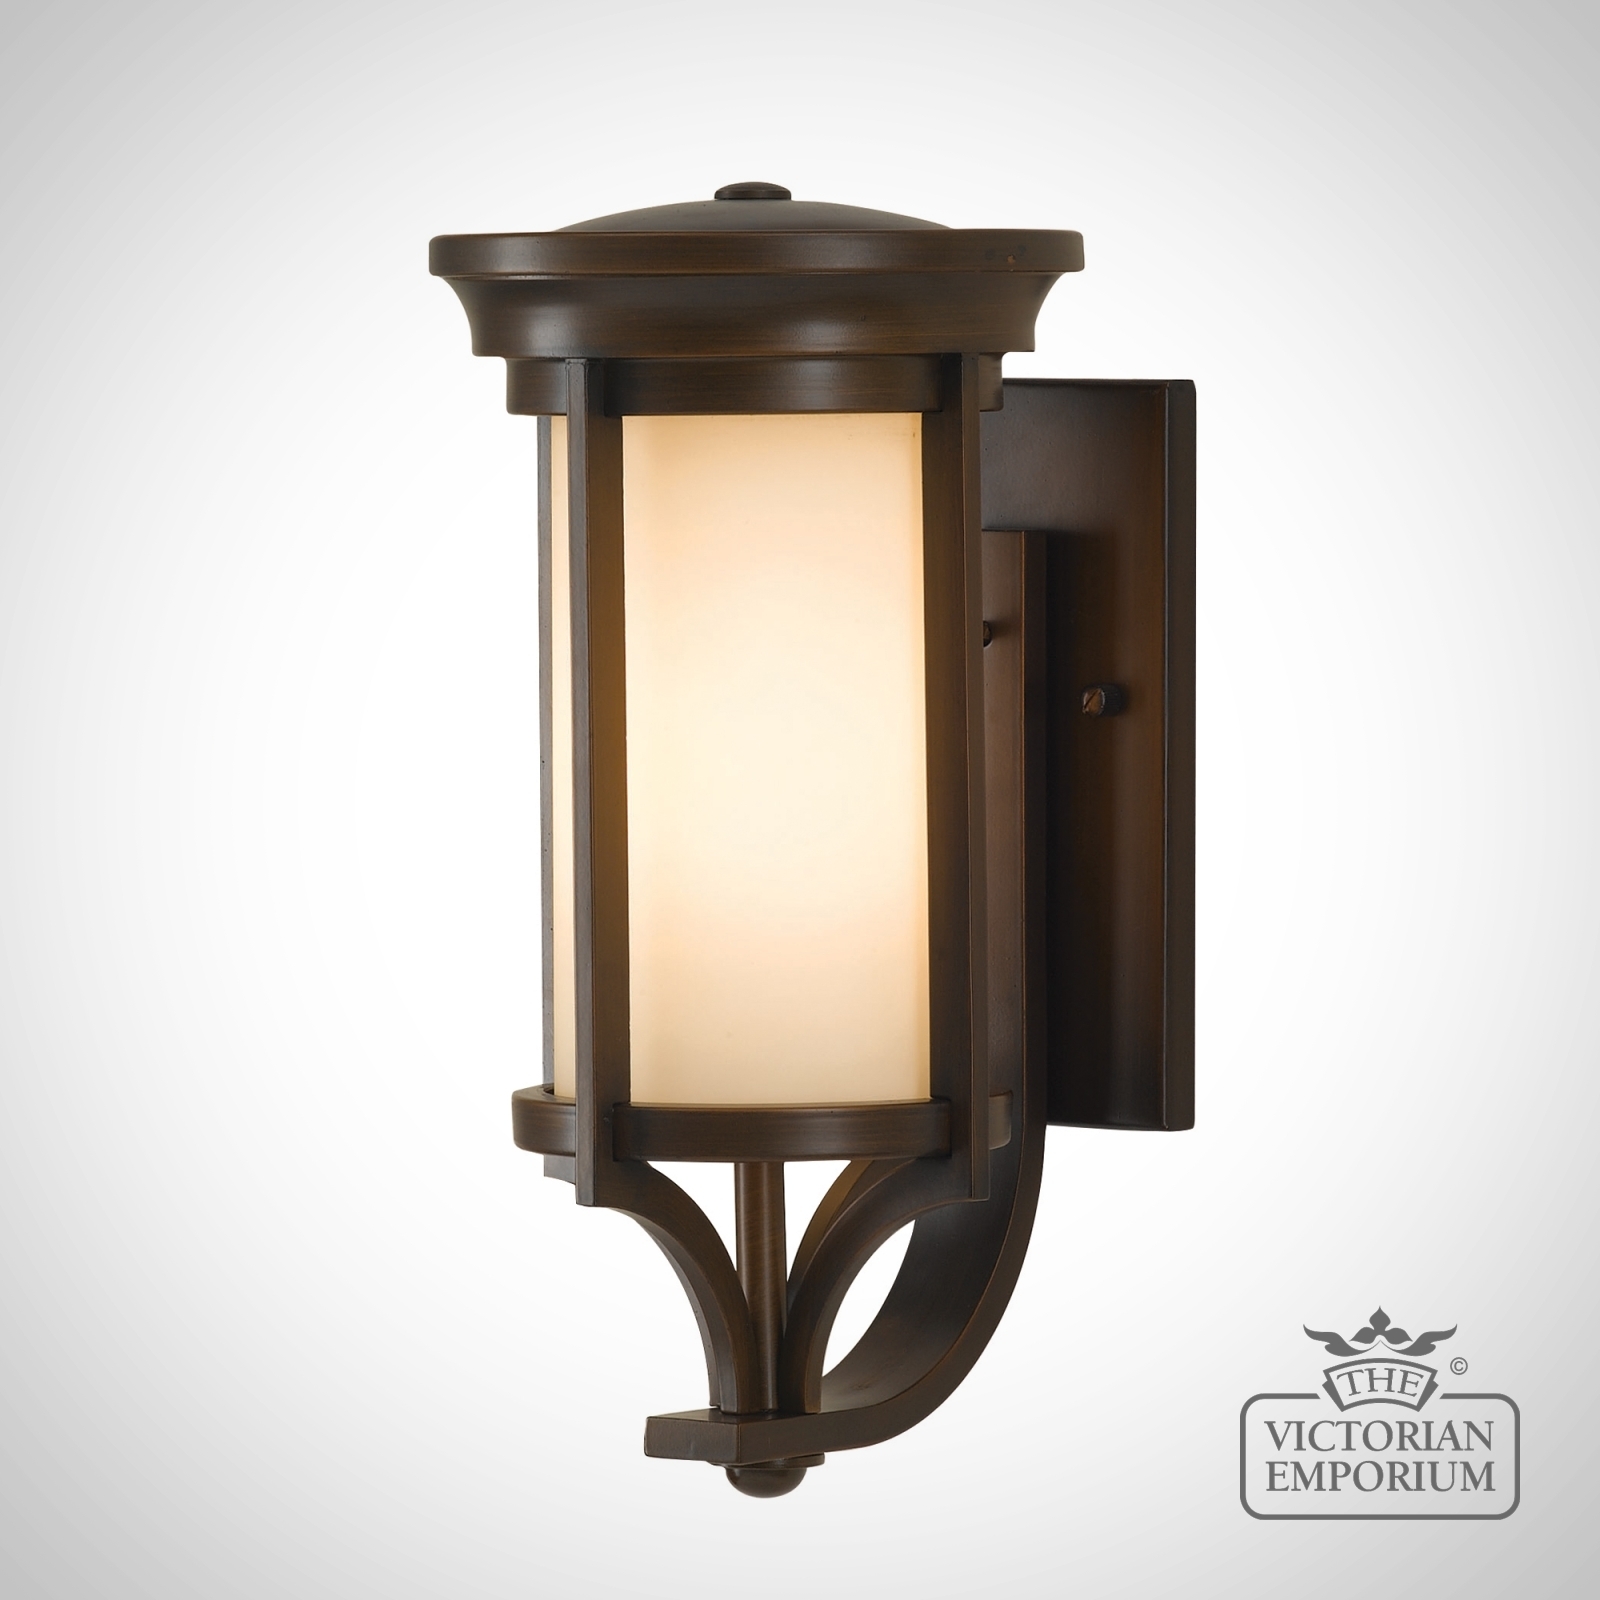 Merrill Wall Lantern in a Rich Bronze Finish - choice of sizes